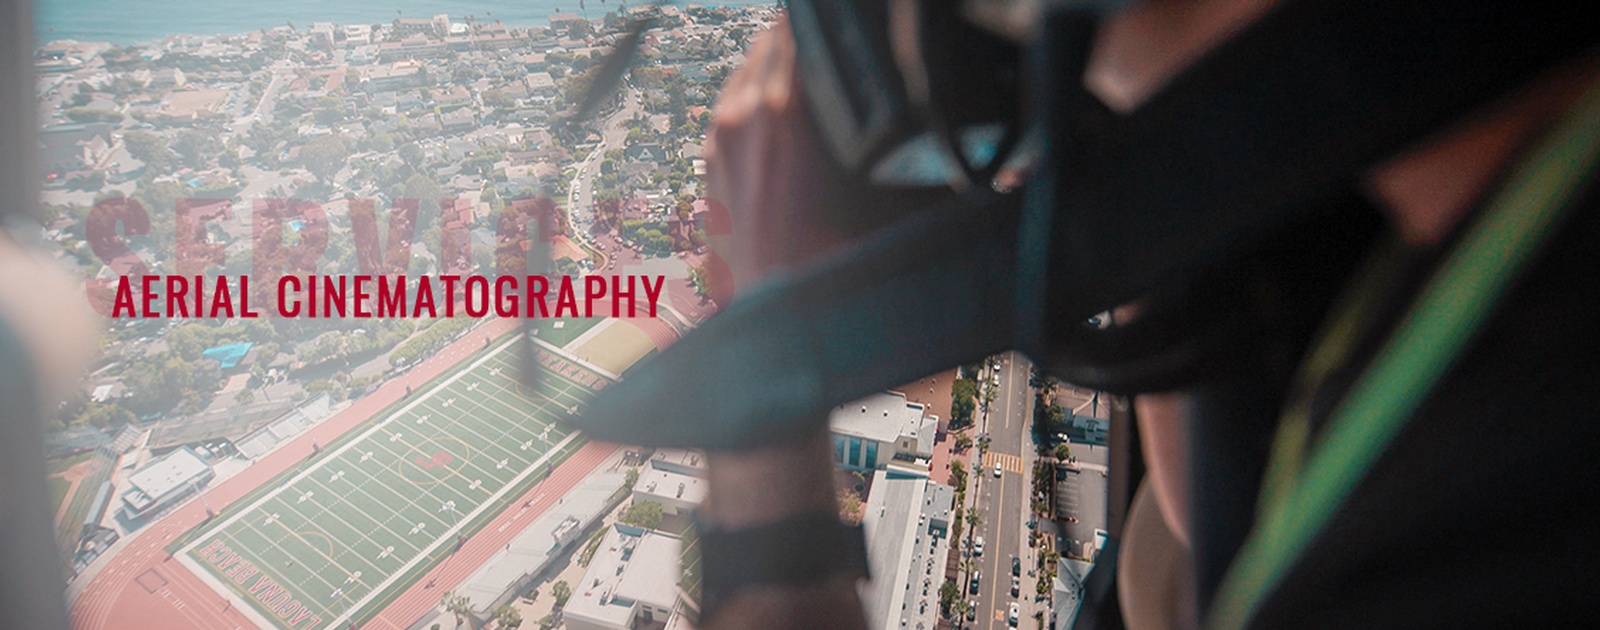 Aerial Cinematography by Sparkle Films LLC - Aerial Videography Orange County